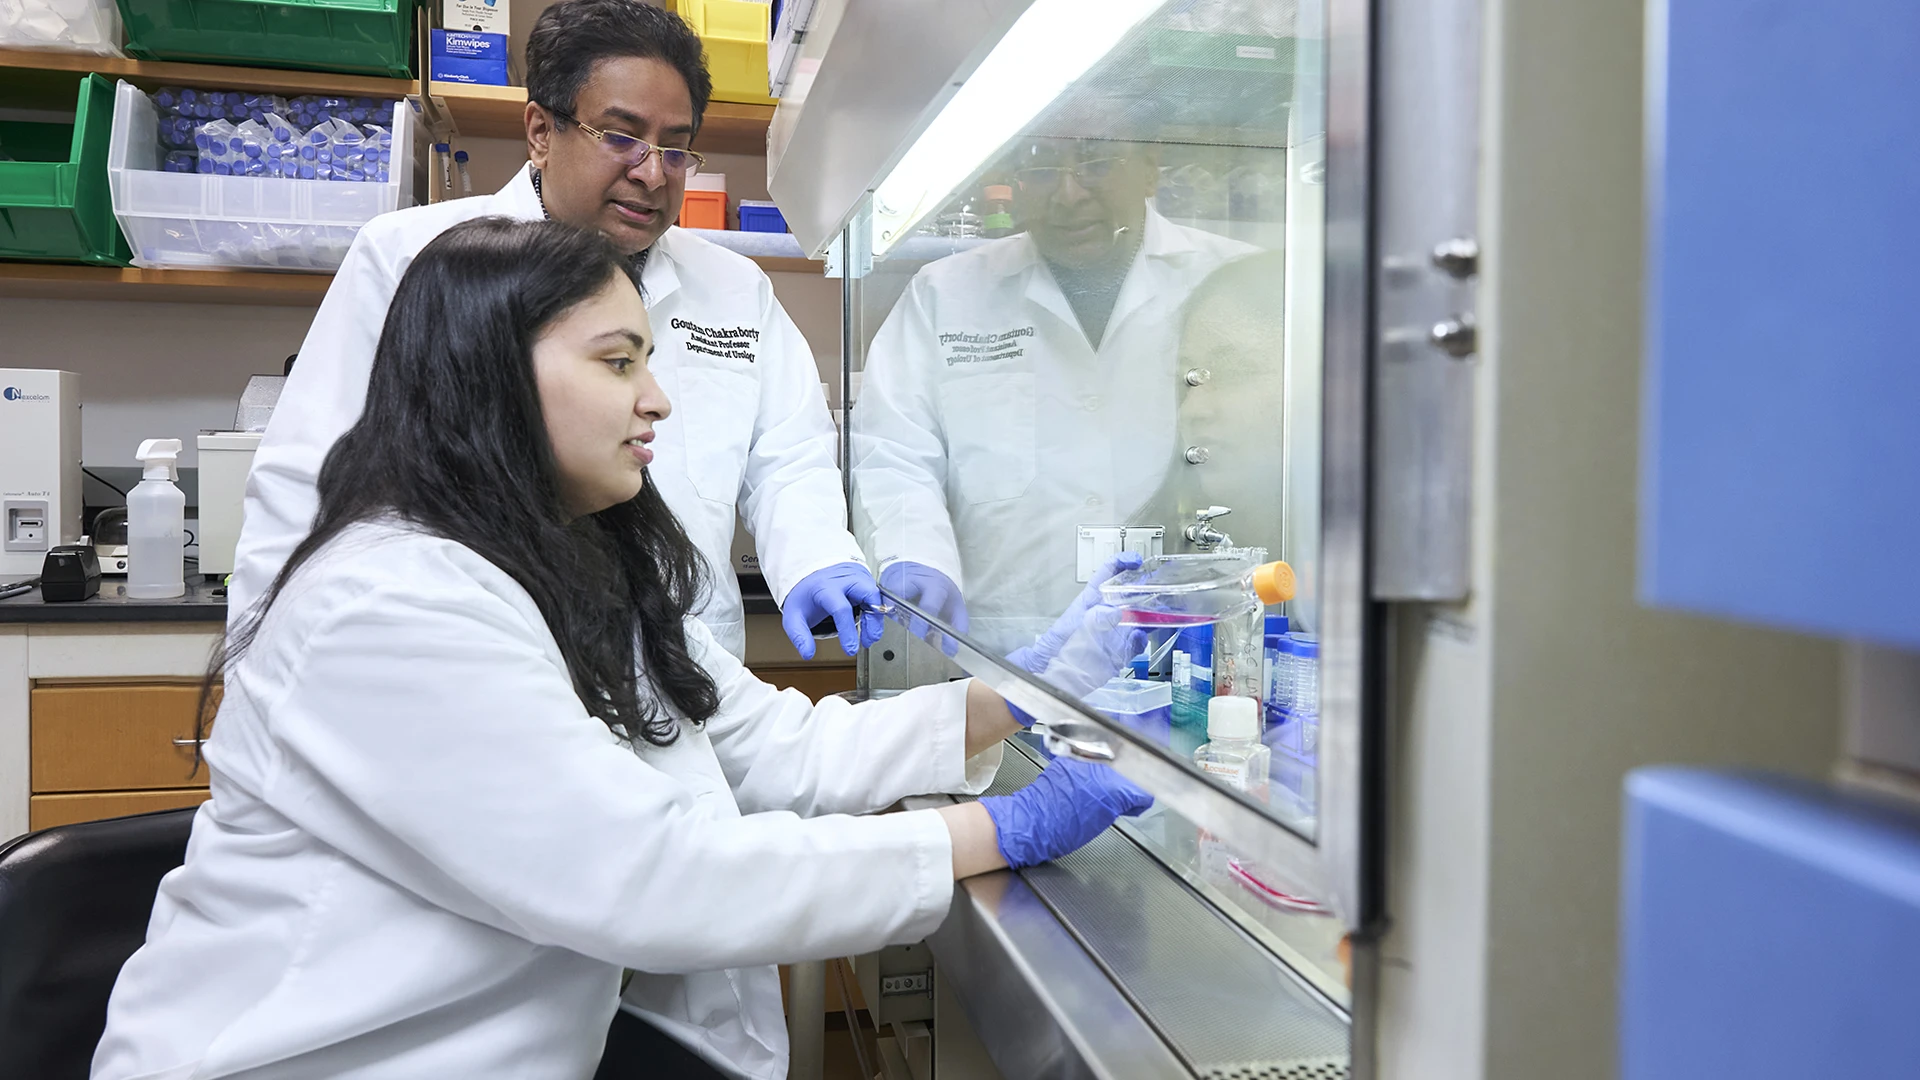 Dr. Chakraborty’s (right) and Nabila Zaman (left) are working on a new study, which involves creating 2D cell culture models and 3D organoids derived from human prostate tumor cells to model how mutations in various DNA damage repair genes may induce tumor cells’ resistance to androgen-deprivation therapy.